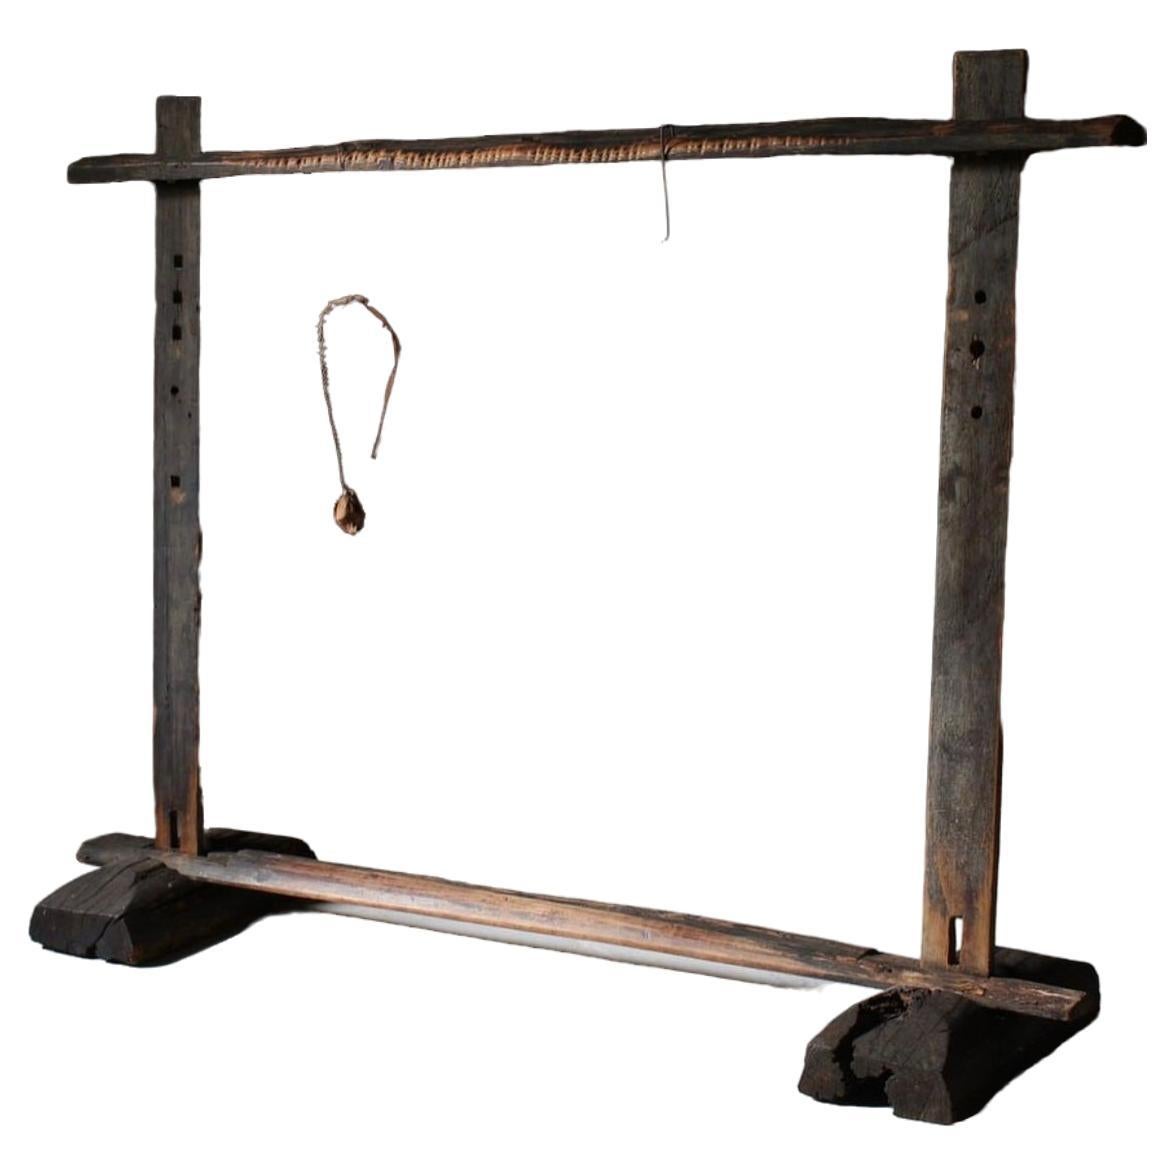 Edo period coat rack stand, easy to assemble